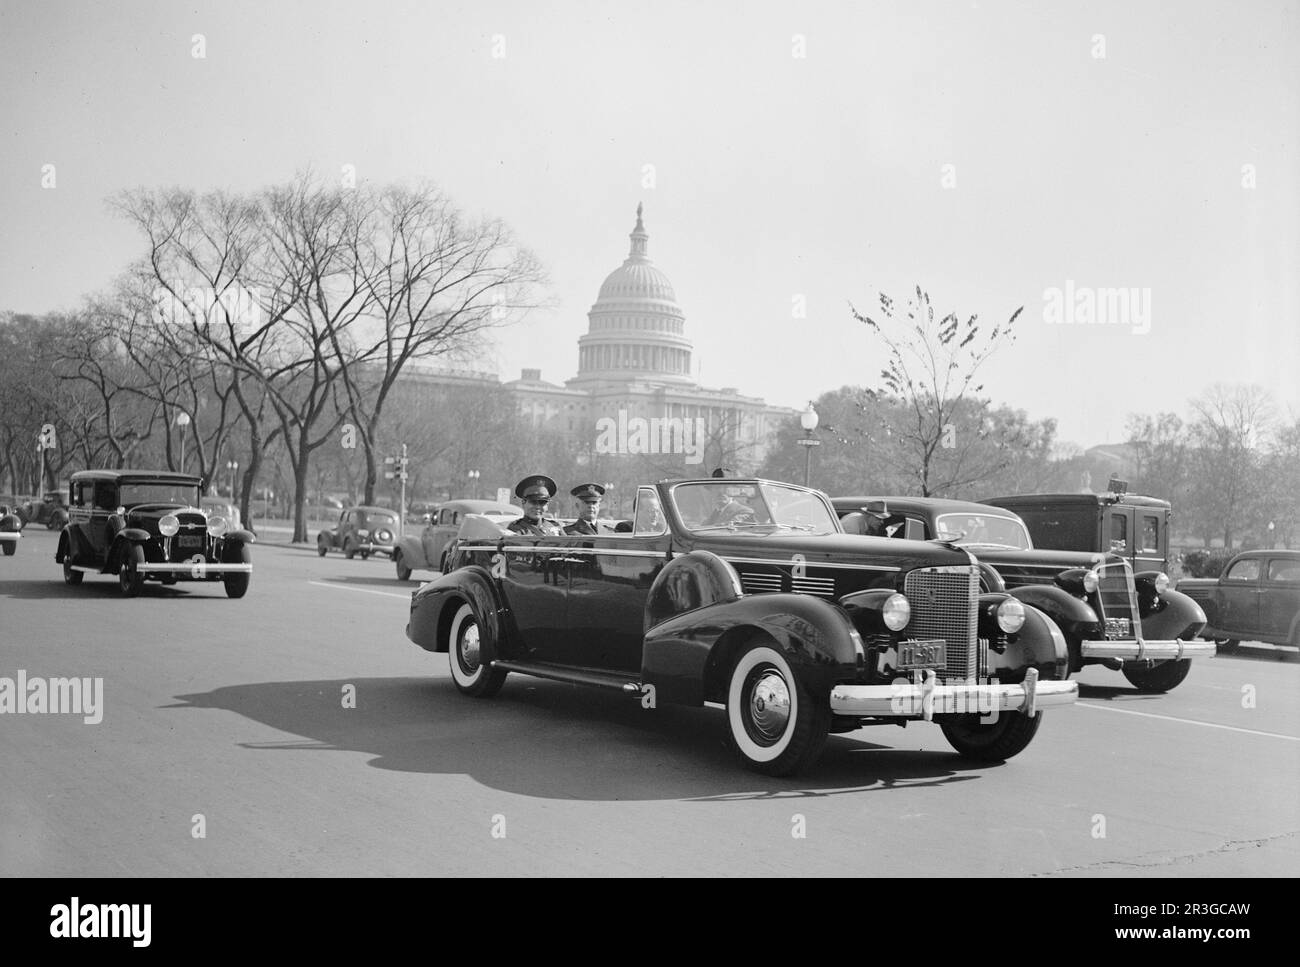 Cuban soldier Fulgencio Batista and Chief of Staff Malin Craig riding in a Cadillac as they pass the Capitol in Washington D.C. Stock Photo